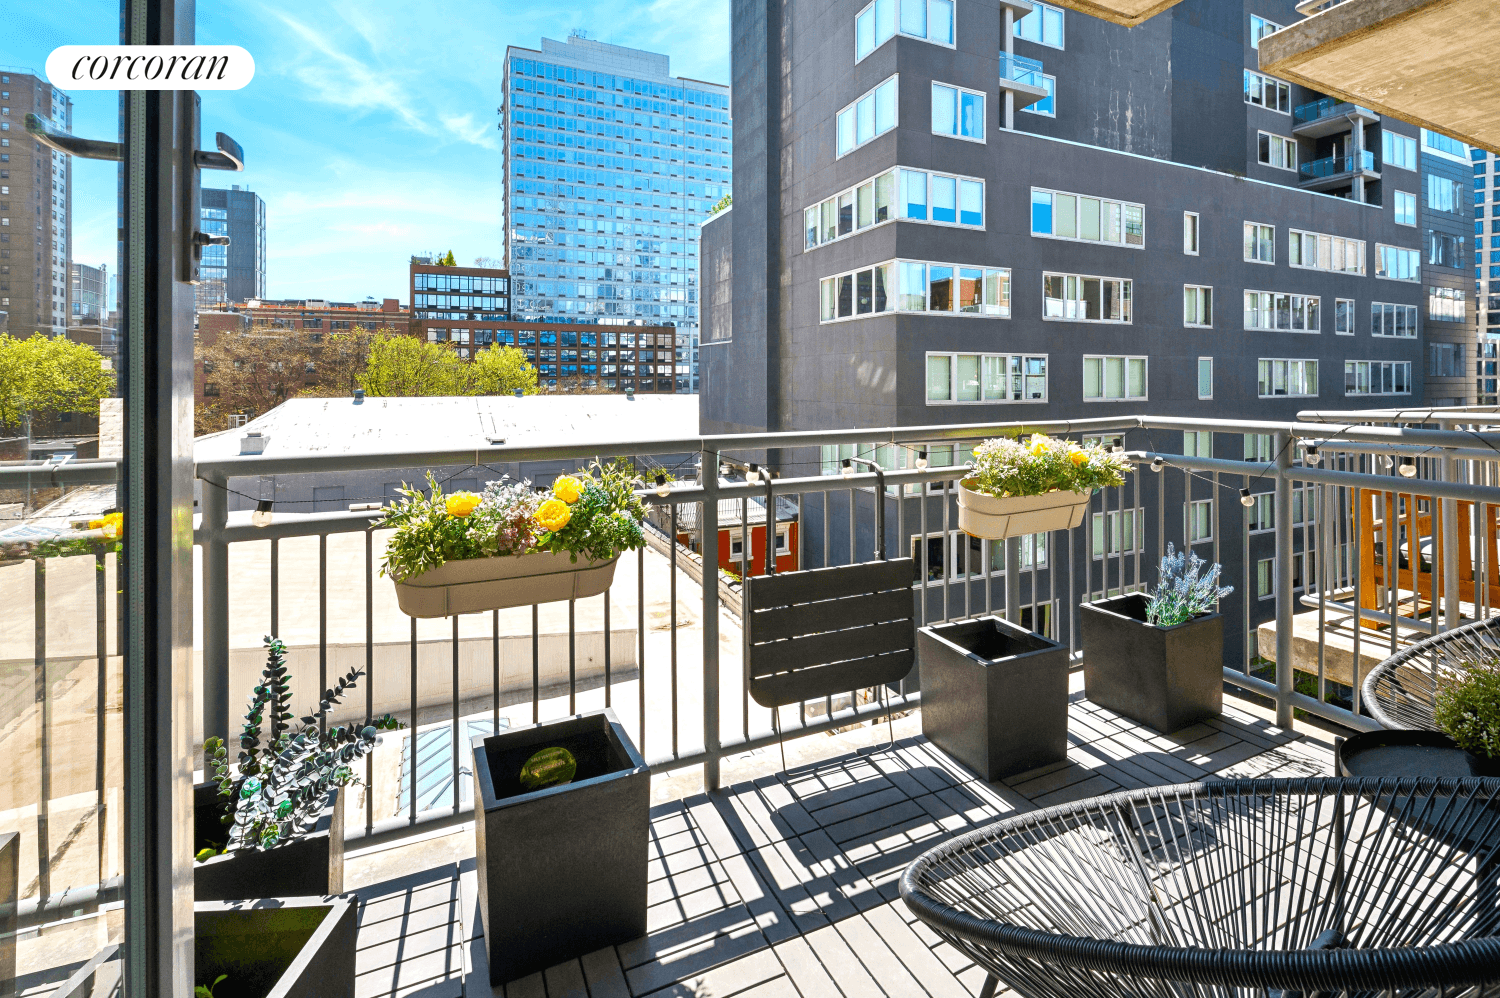 Fantastic Location Full Service Luxury Building WASHER DRYER in Unit PRIVATE OUTDOOR SPACEExperience a great opportunity to reside in one of the most coveted luxury building in the heart of ...